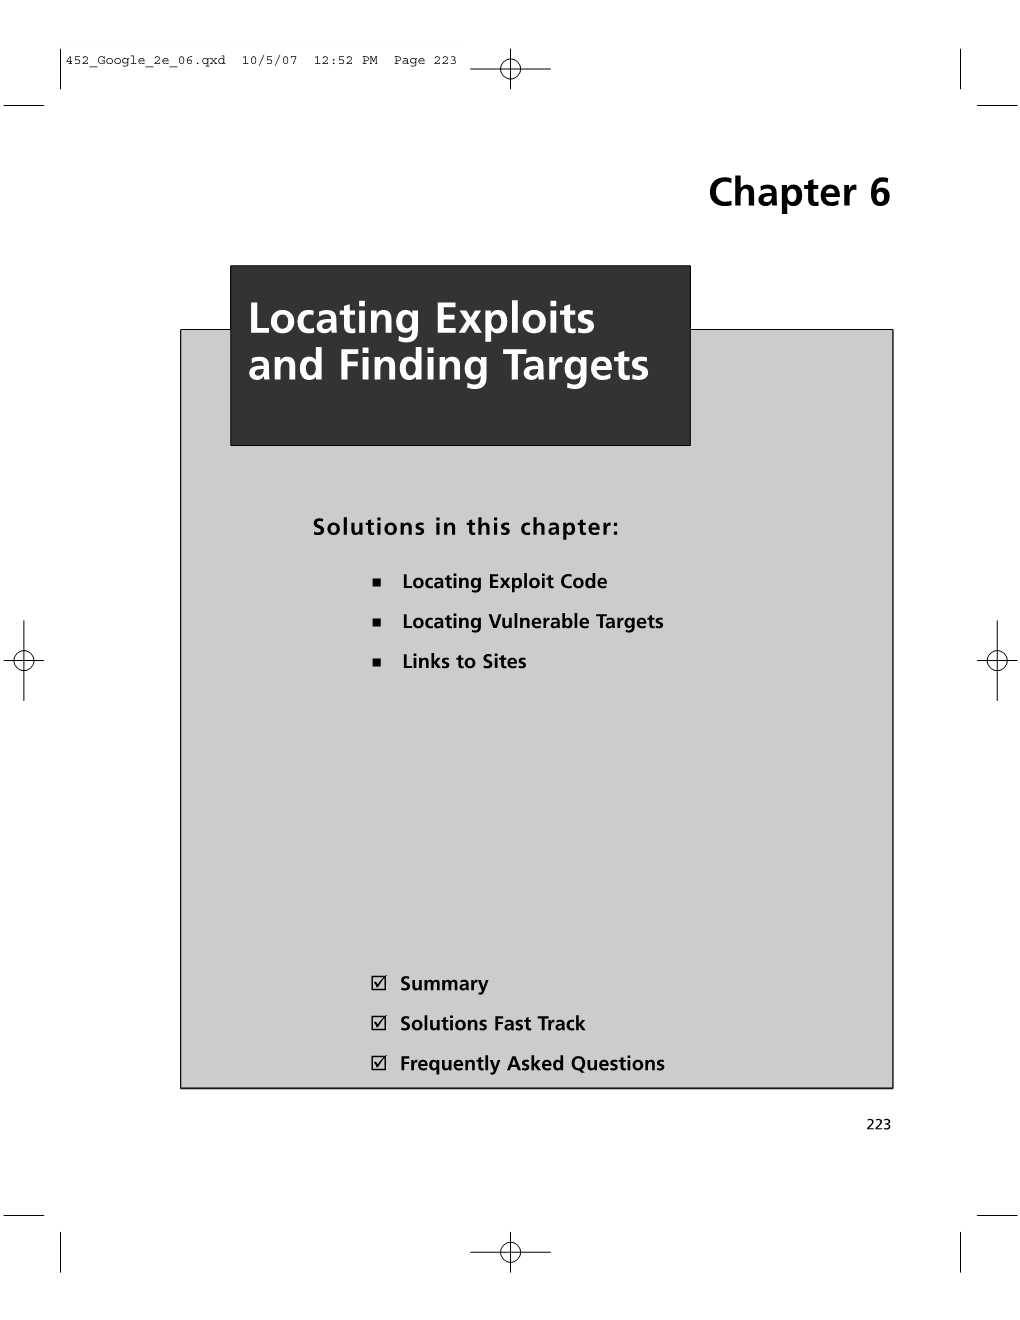 Locating Exploits and Finding Targets